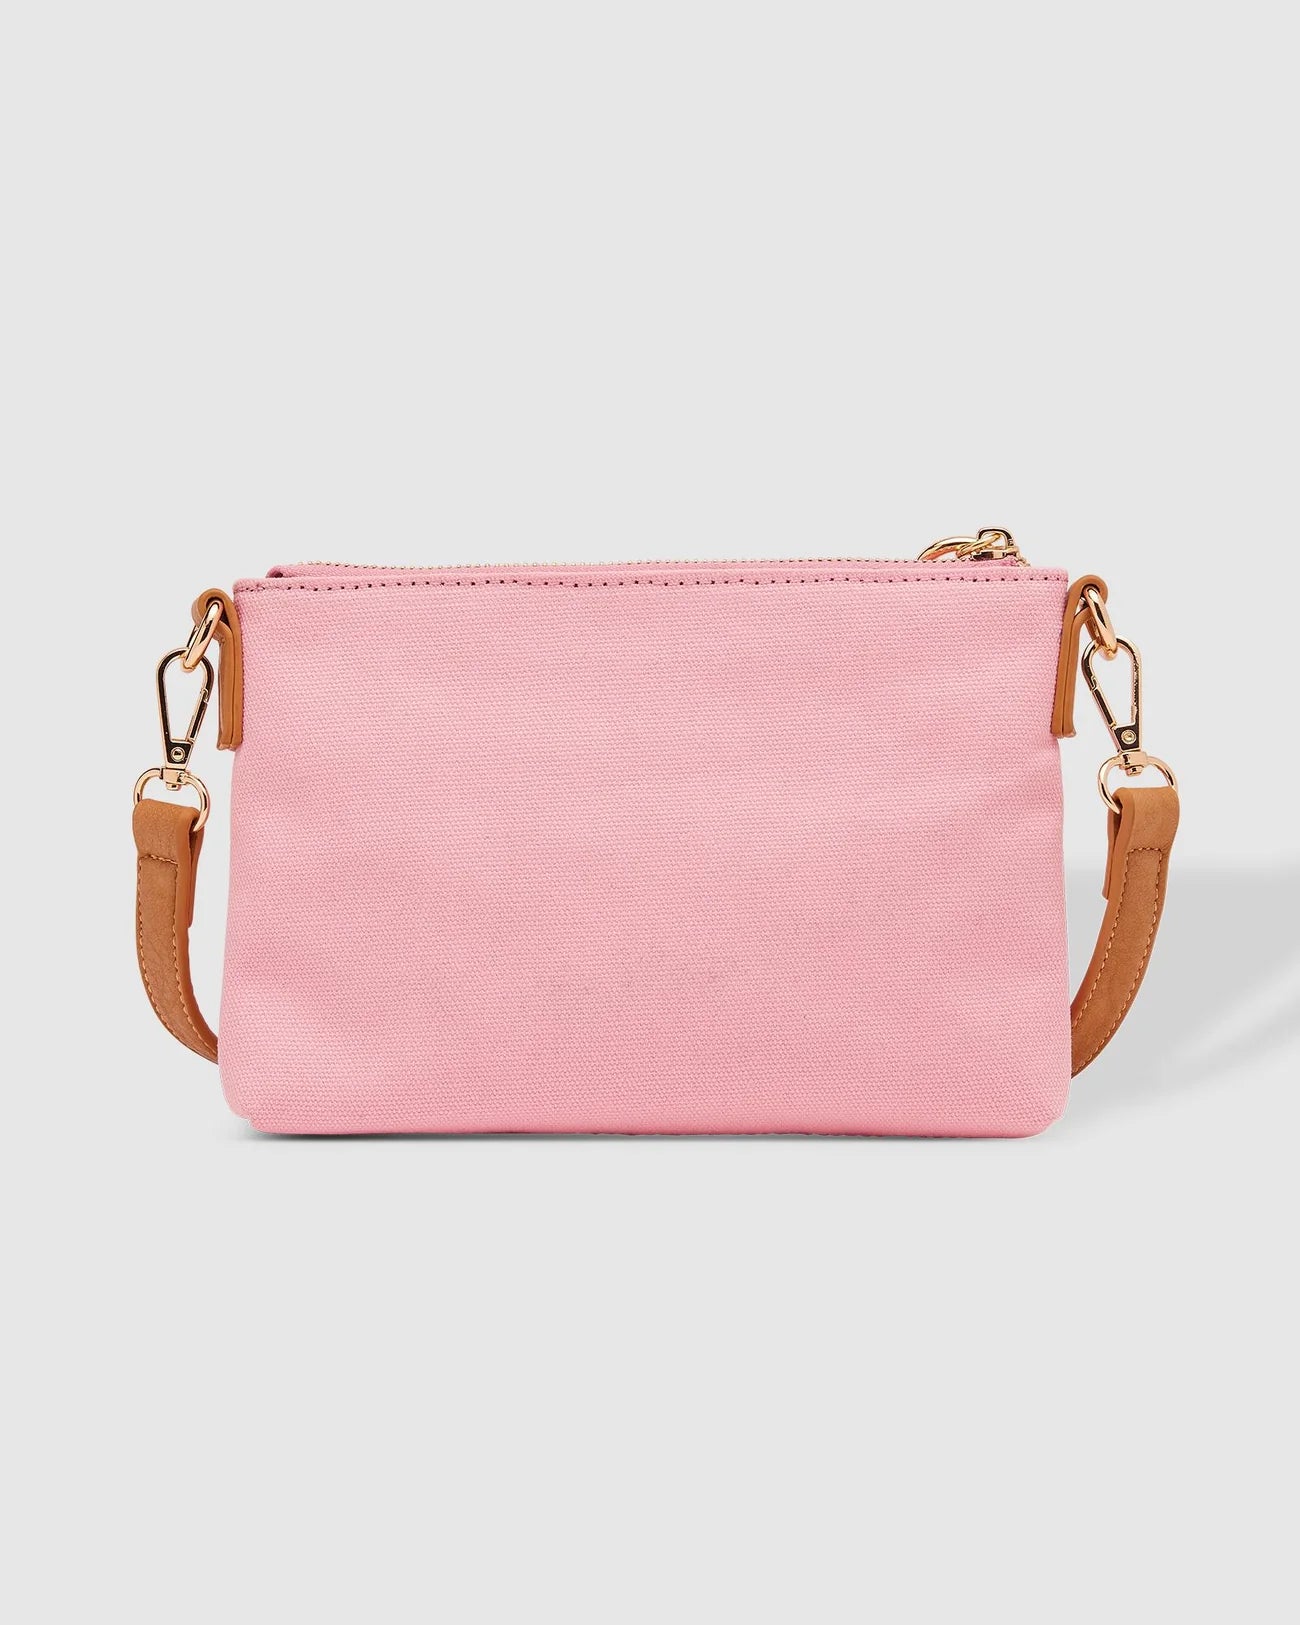 Baby Sophie Crossbody Bag (Pink Canvas/Camel) - Something For Me​​